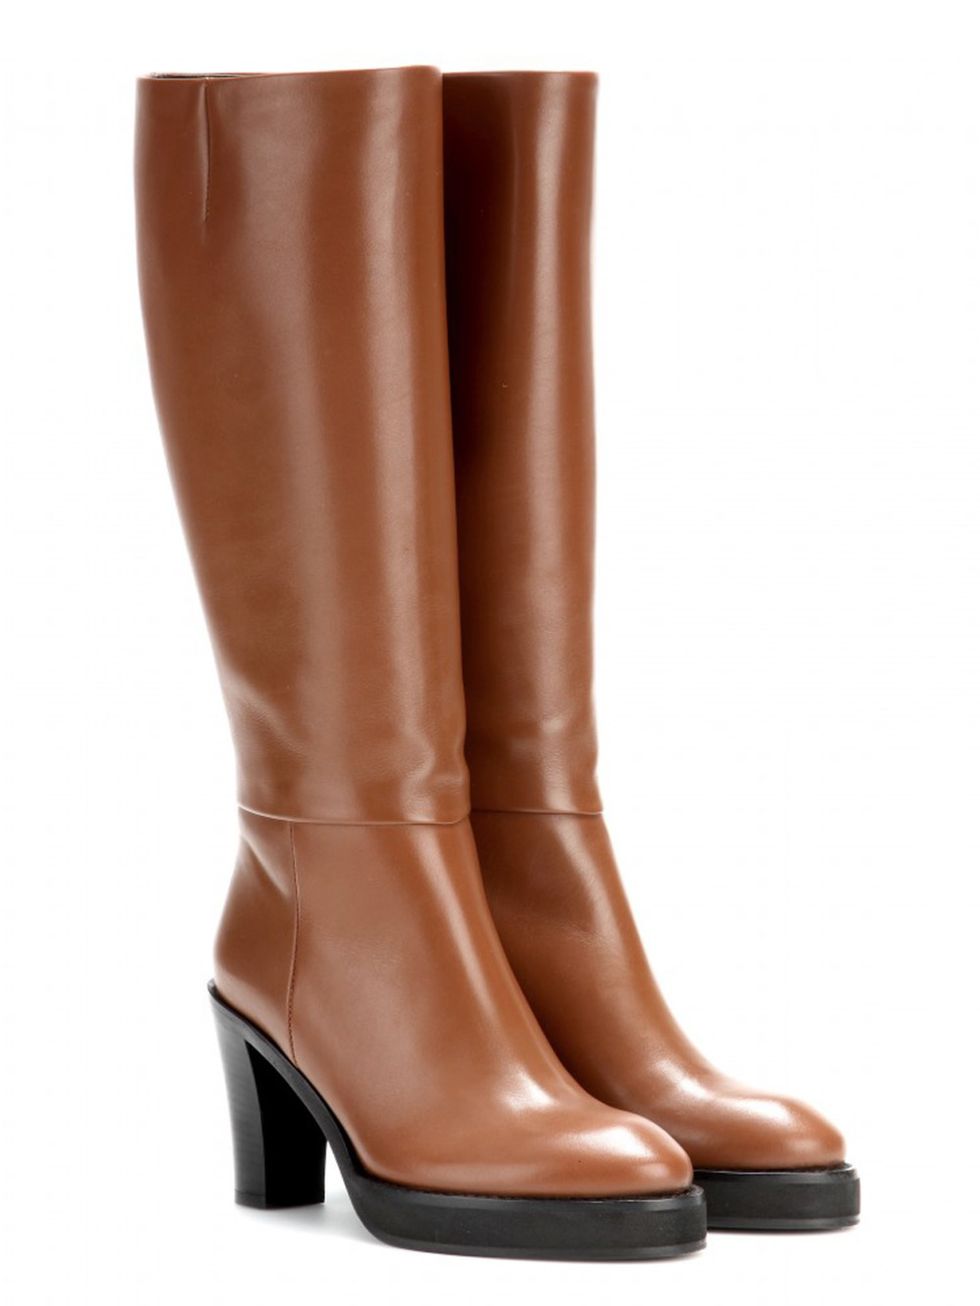 Footwear, Brown, Boot, Tan, Riding boot, Leather, Ingredient, Fashion, Liver, Maroon, 